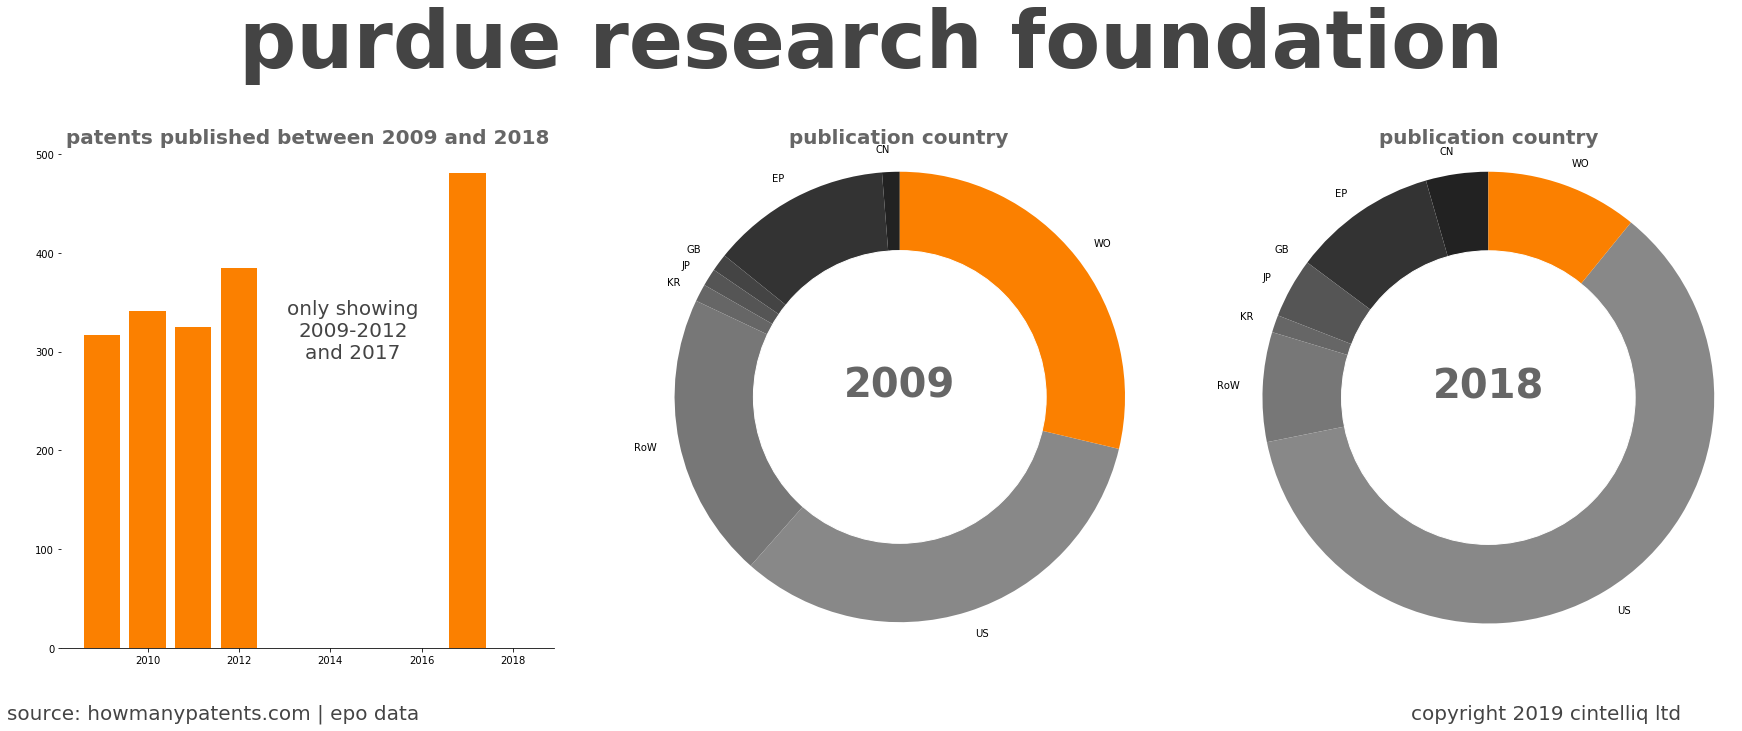 summary of patents for Purdue Research Foundation